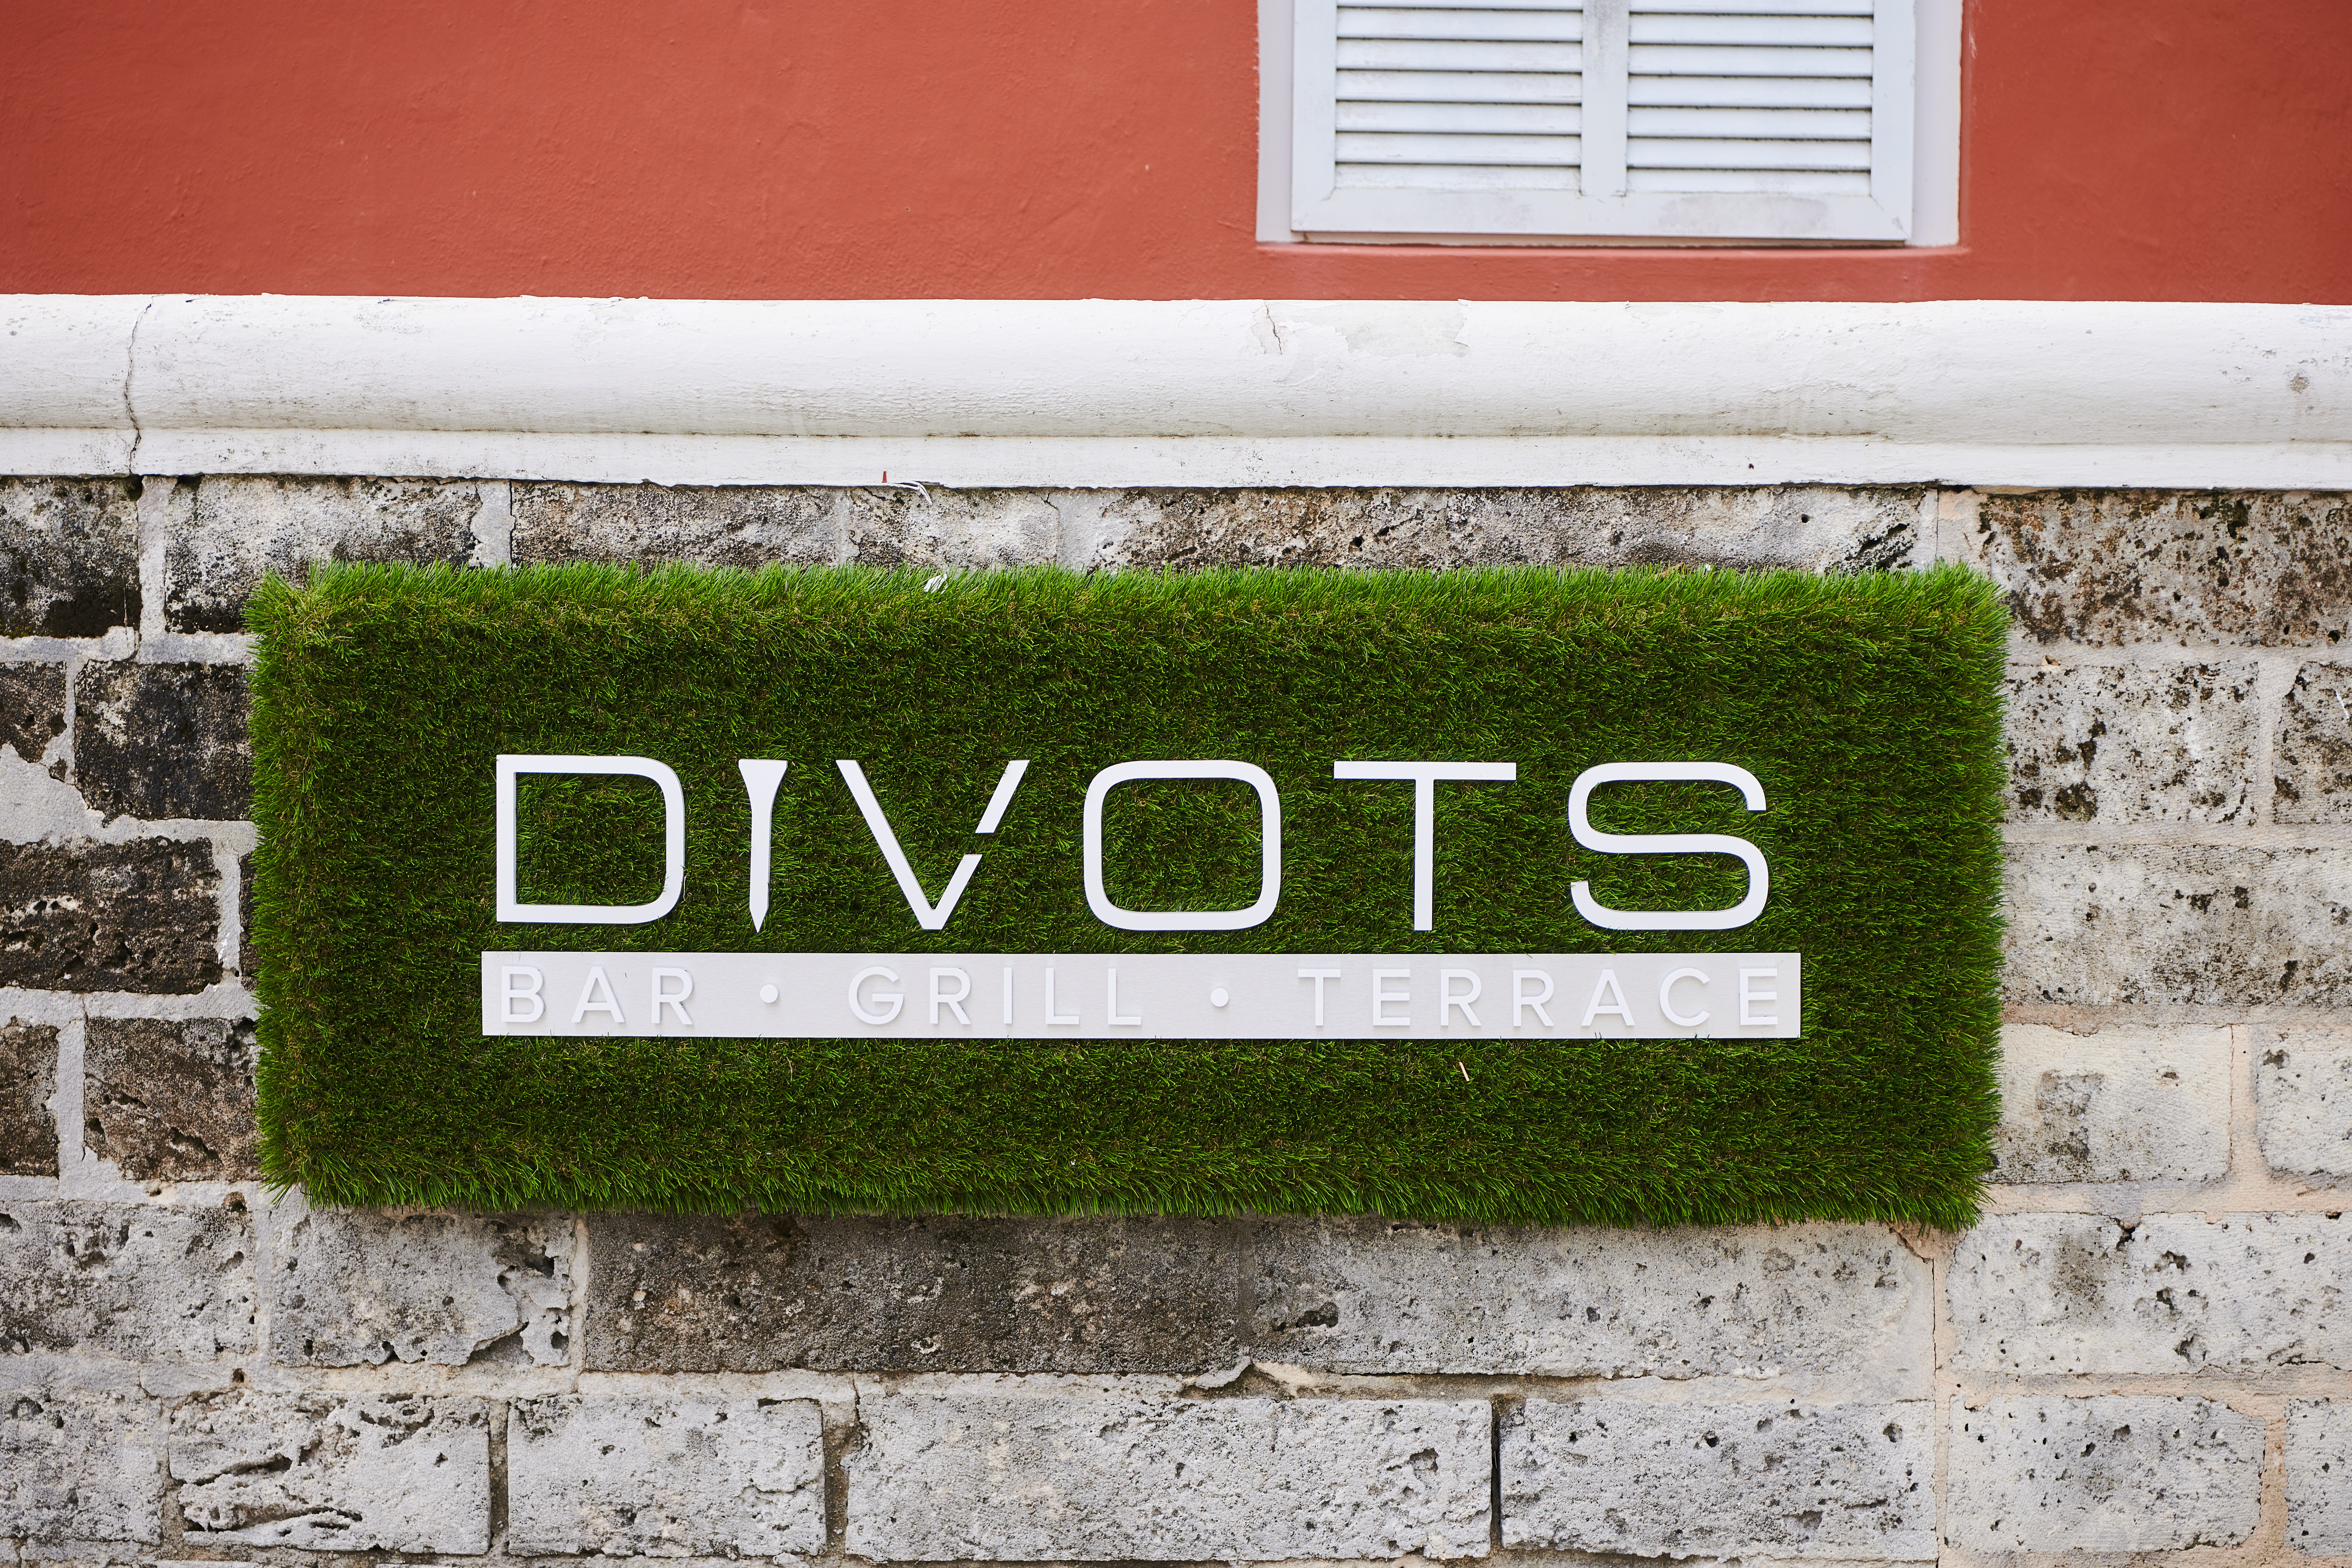 Divots Bar, Grill and Terrace